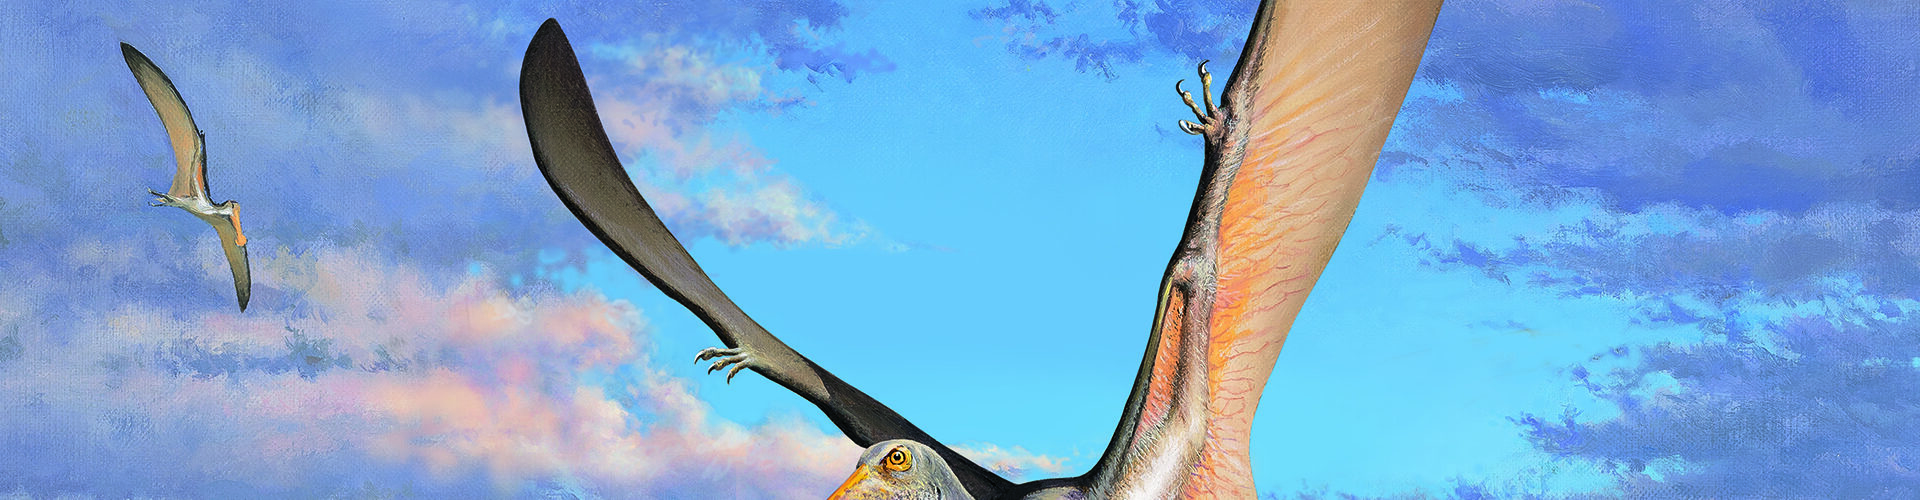 Image for Study finds 107-million-year-old pterosaur bones are oldest in Australia